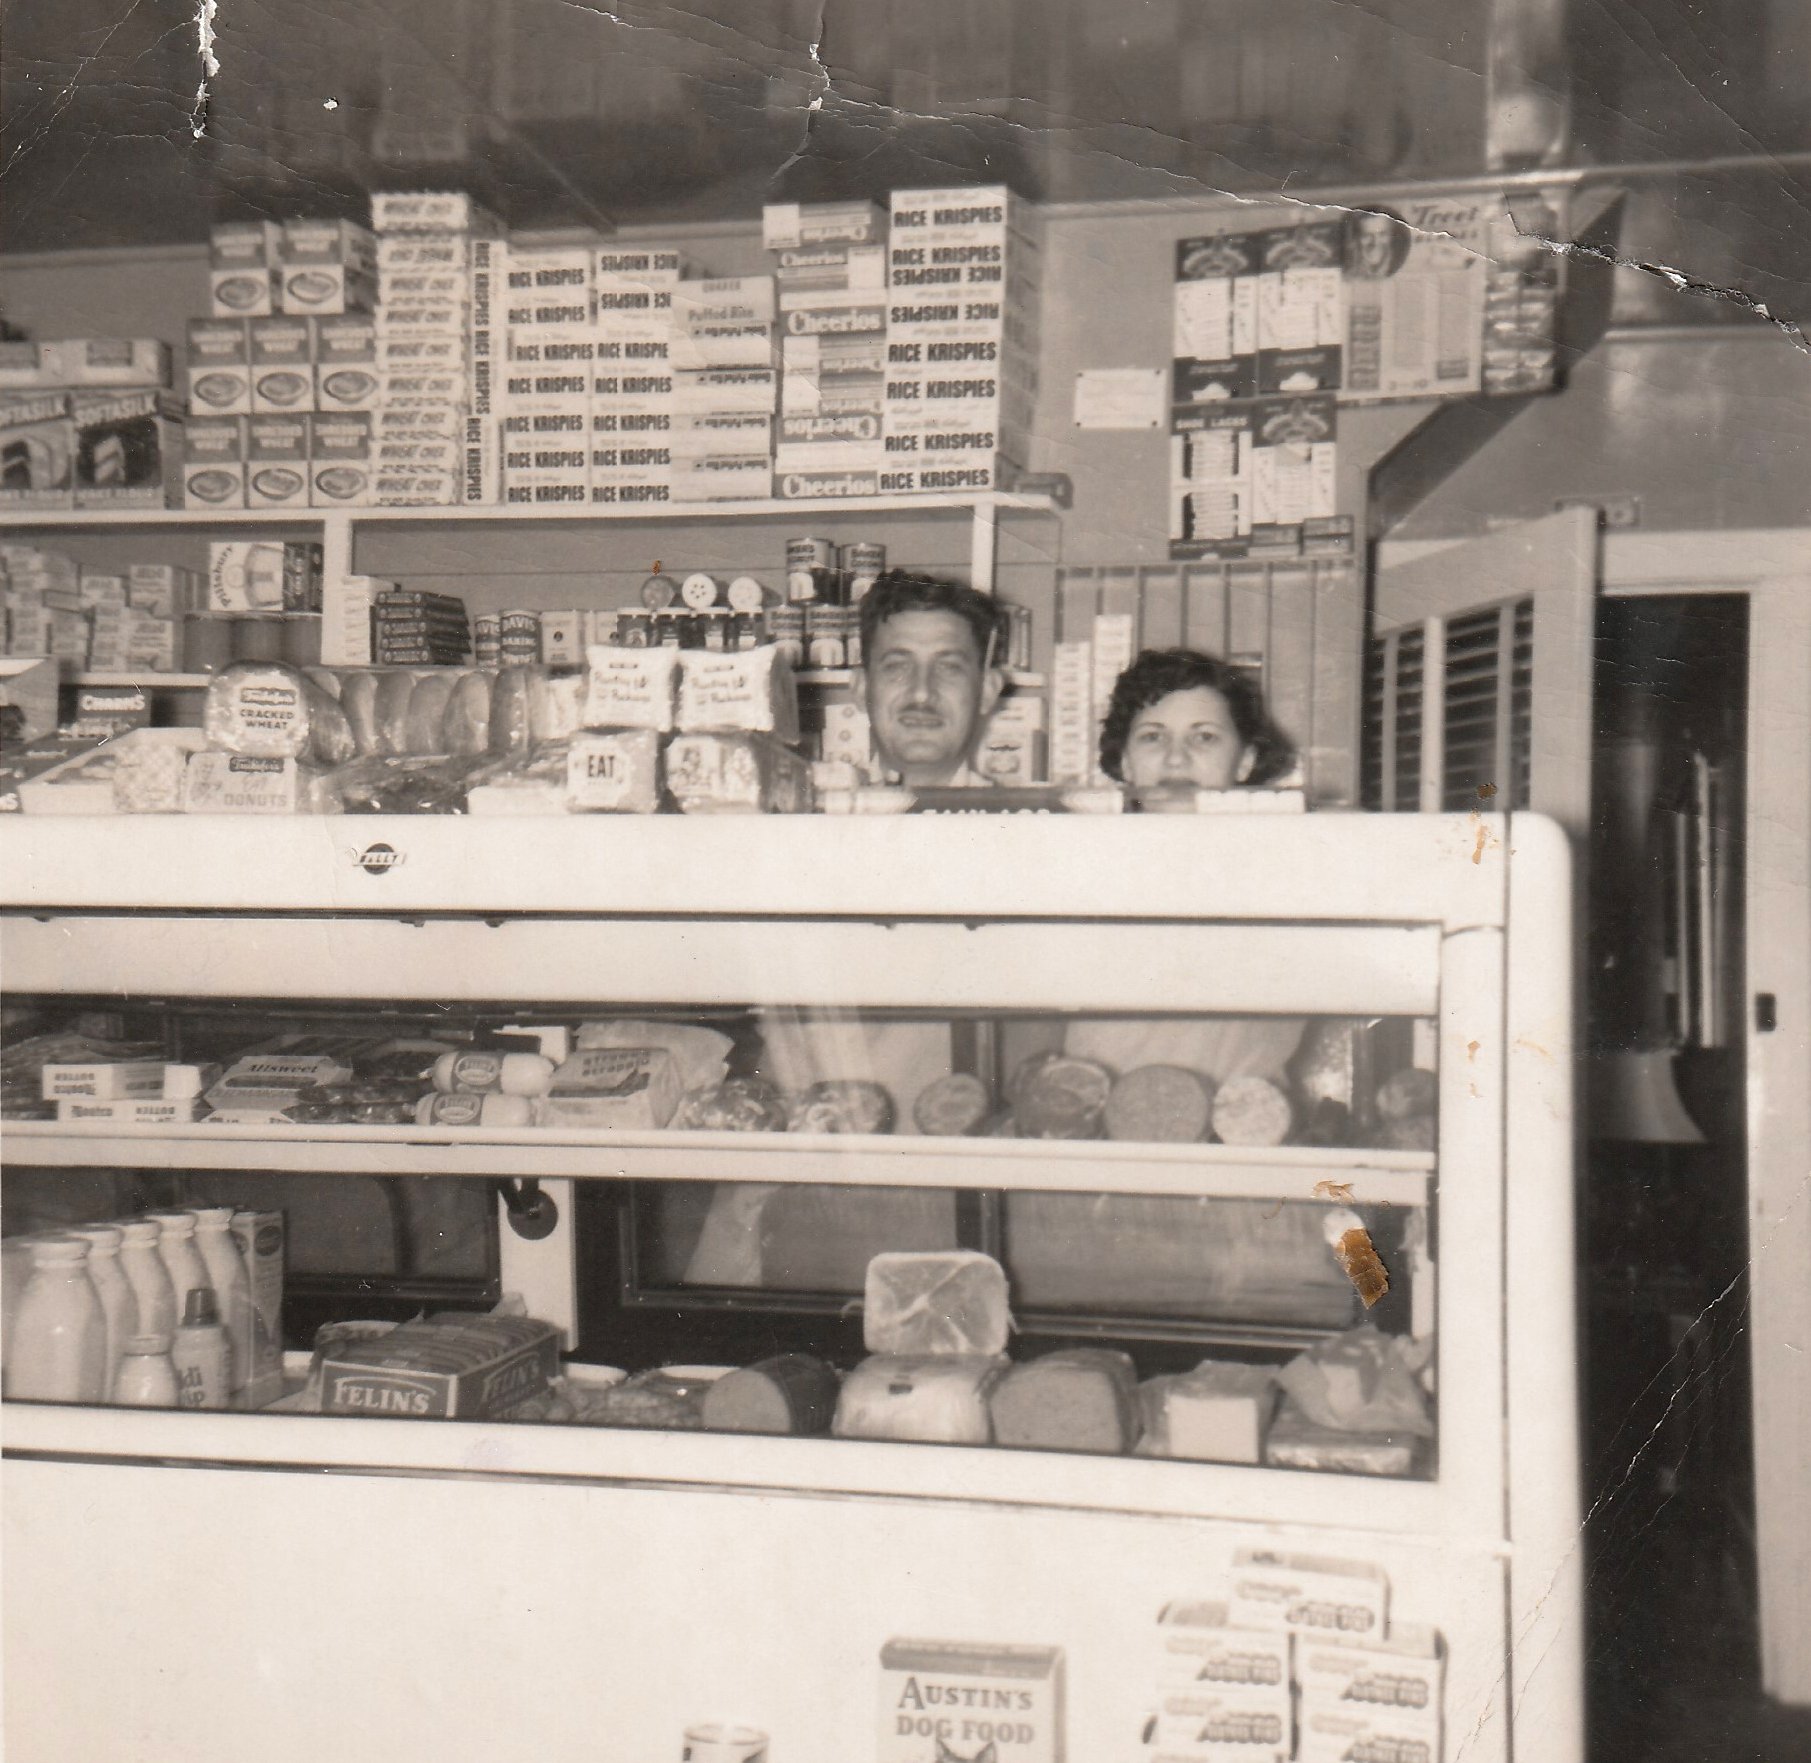 Sam and Jennie behind the deli counter in 1955.